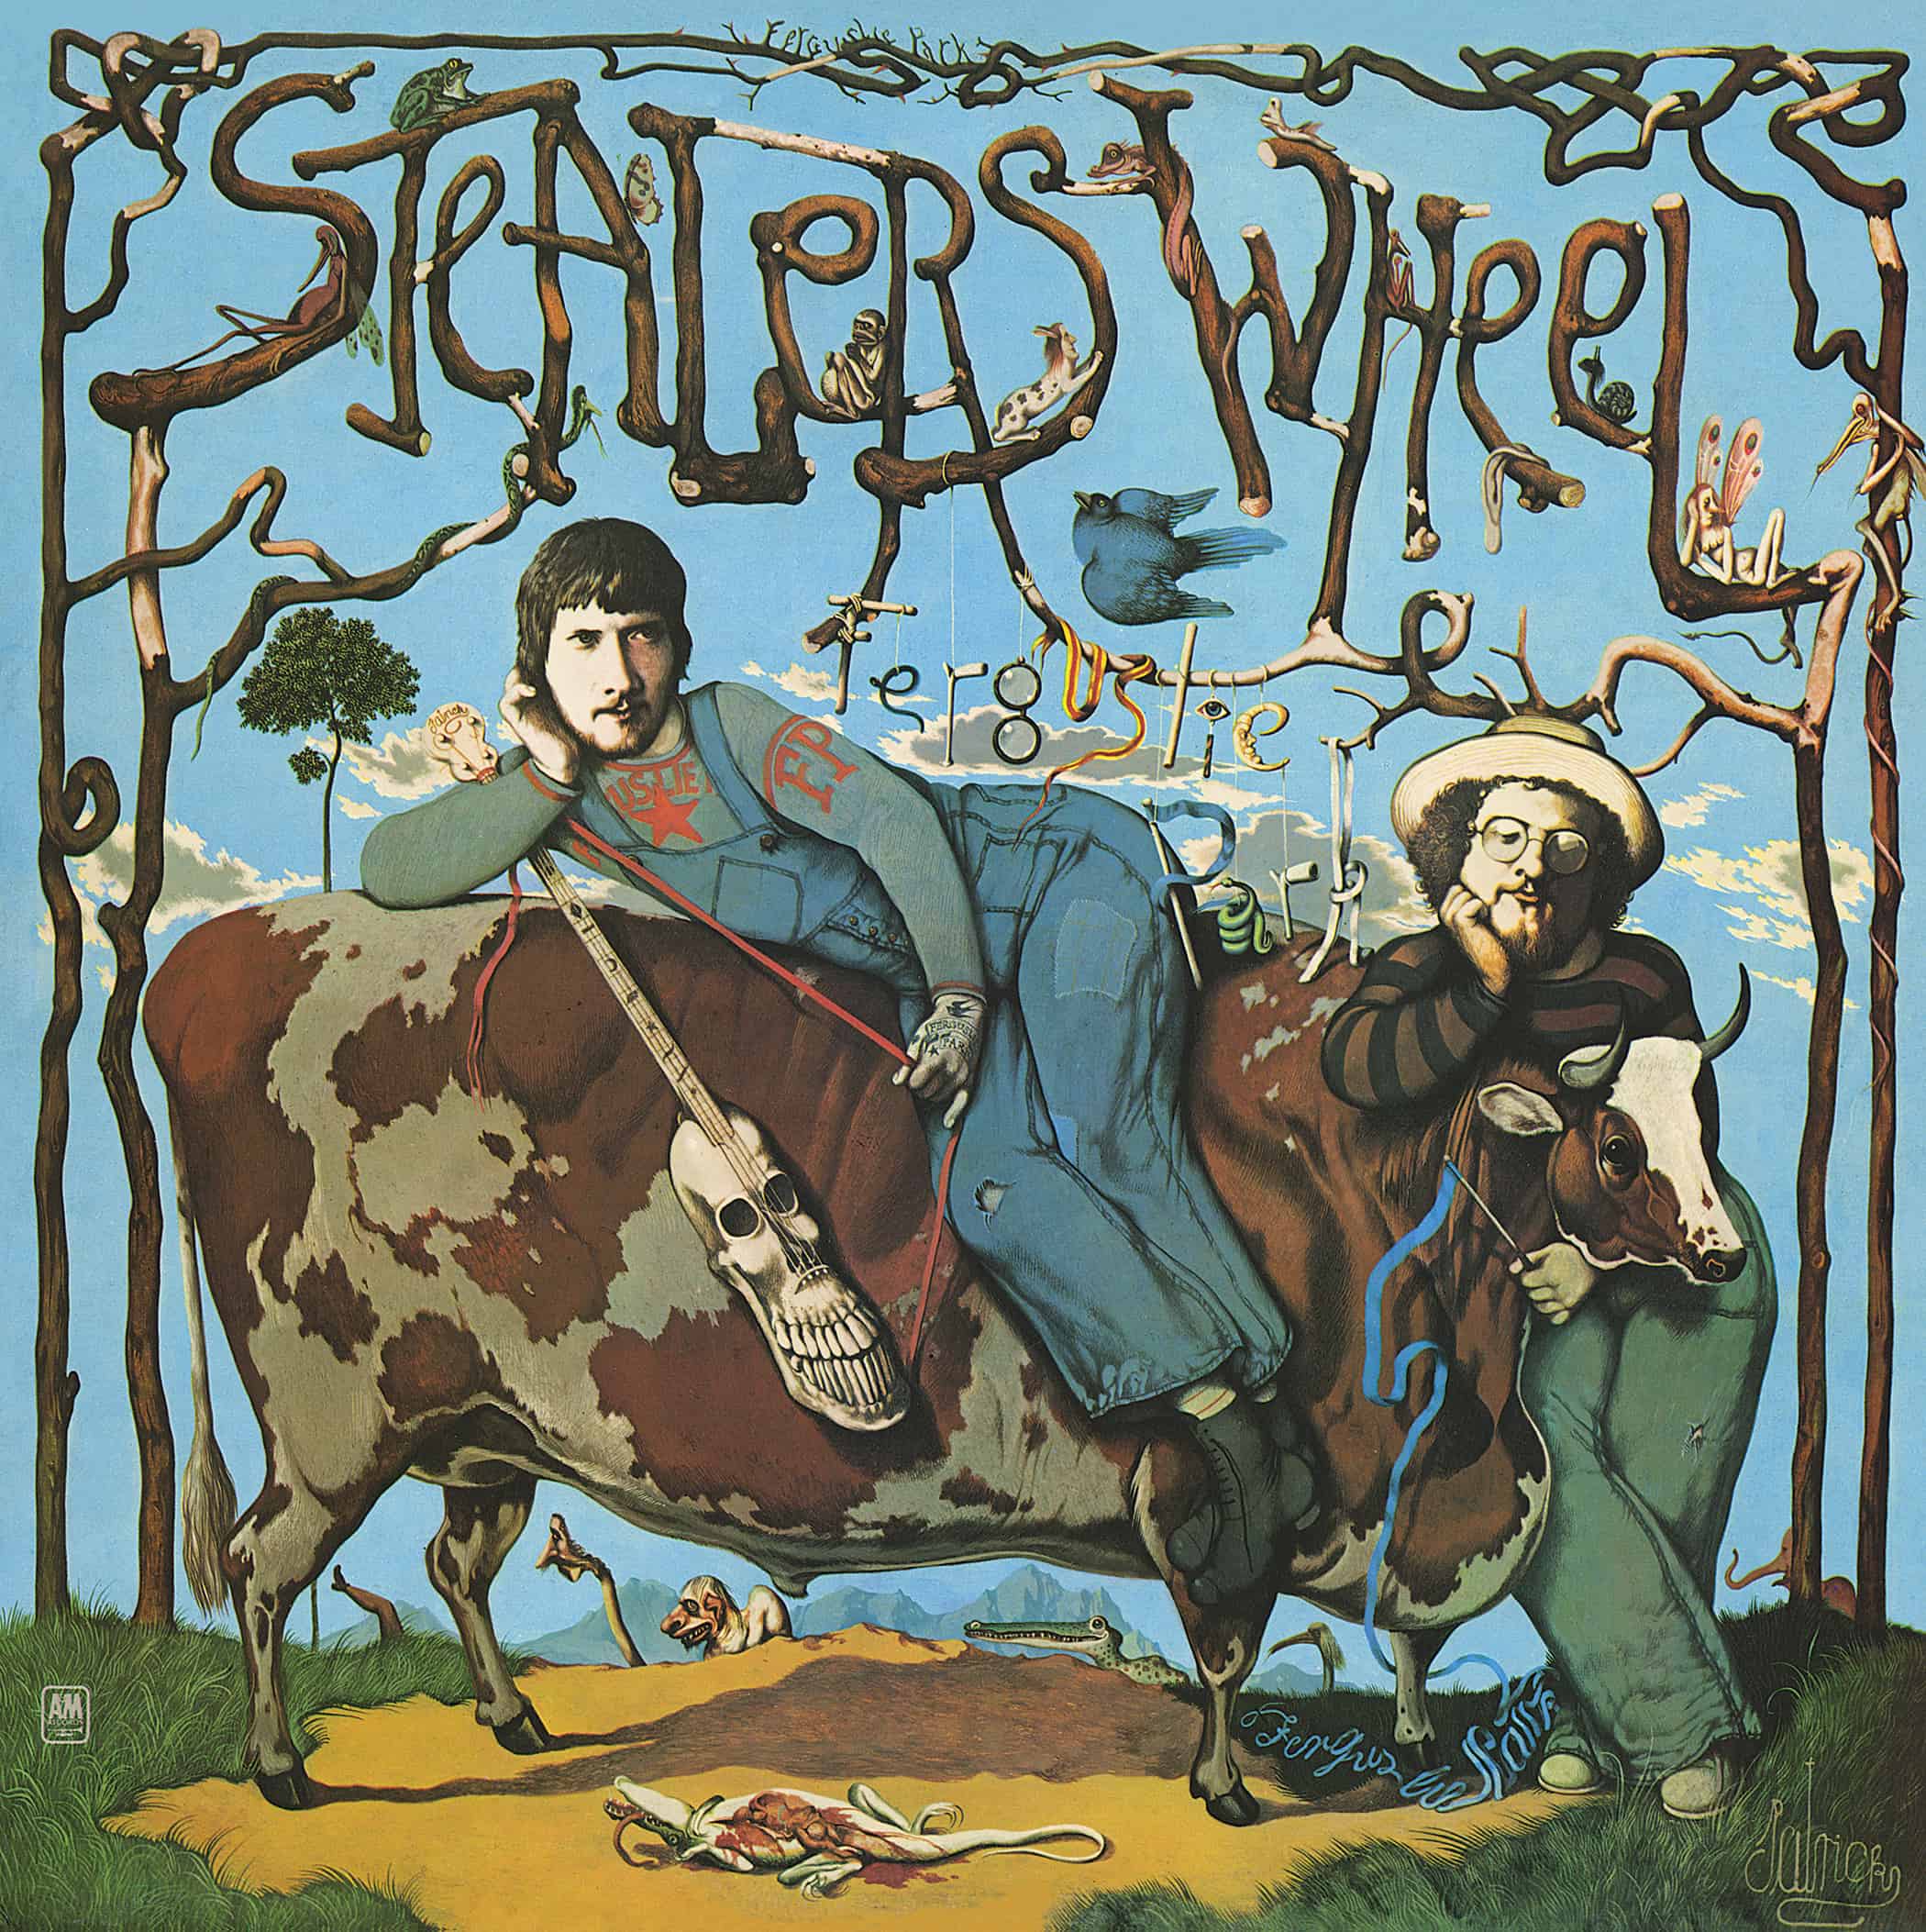 Gerry Rafferty and Stealers Wheel Collected